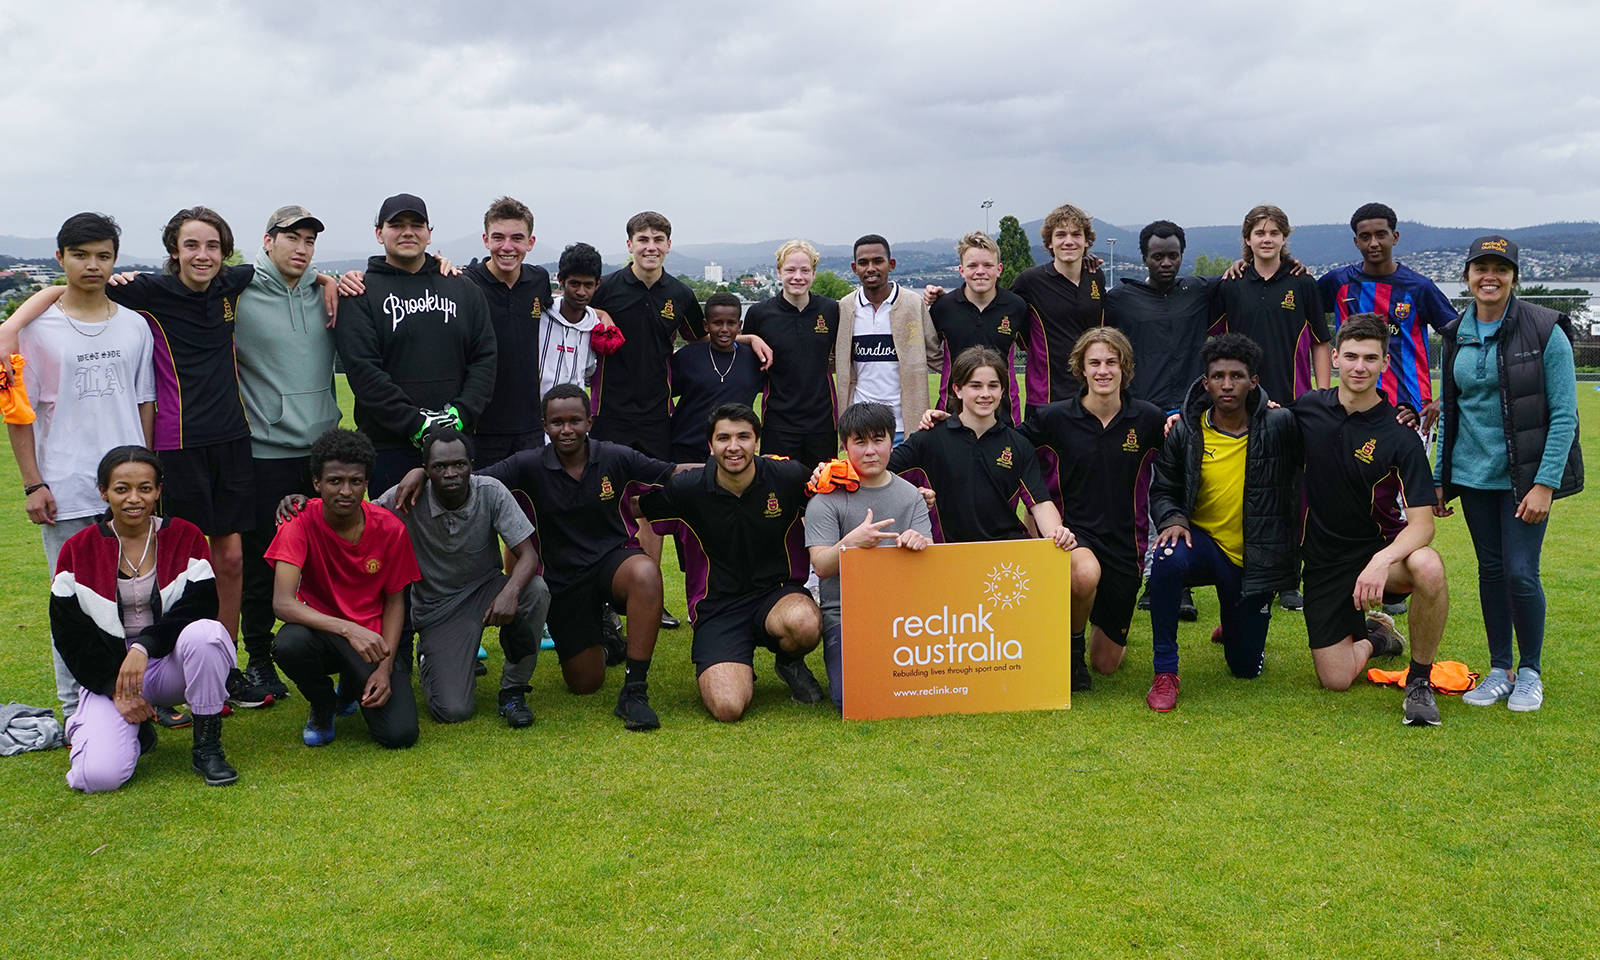 Multicultural Youth Tasmania and Hutchins soccer teams